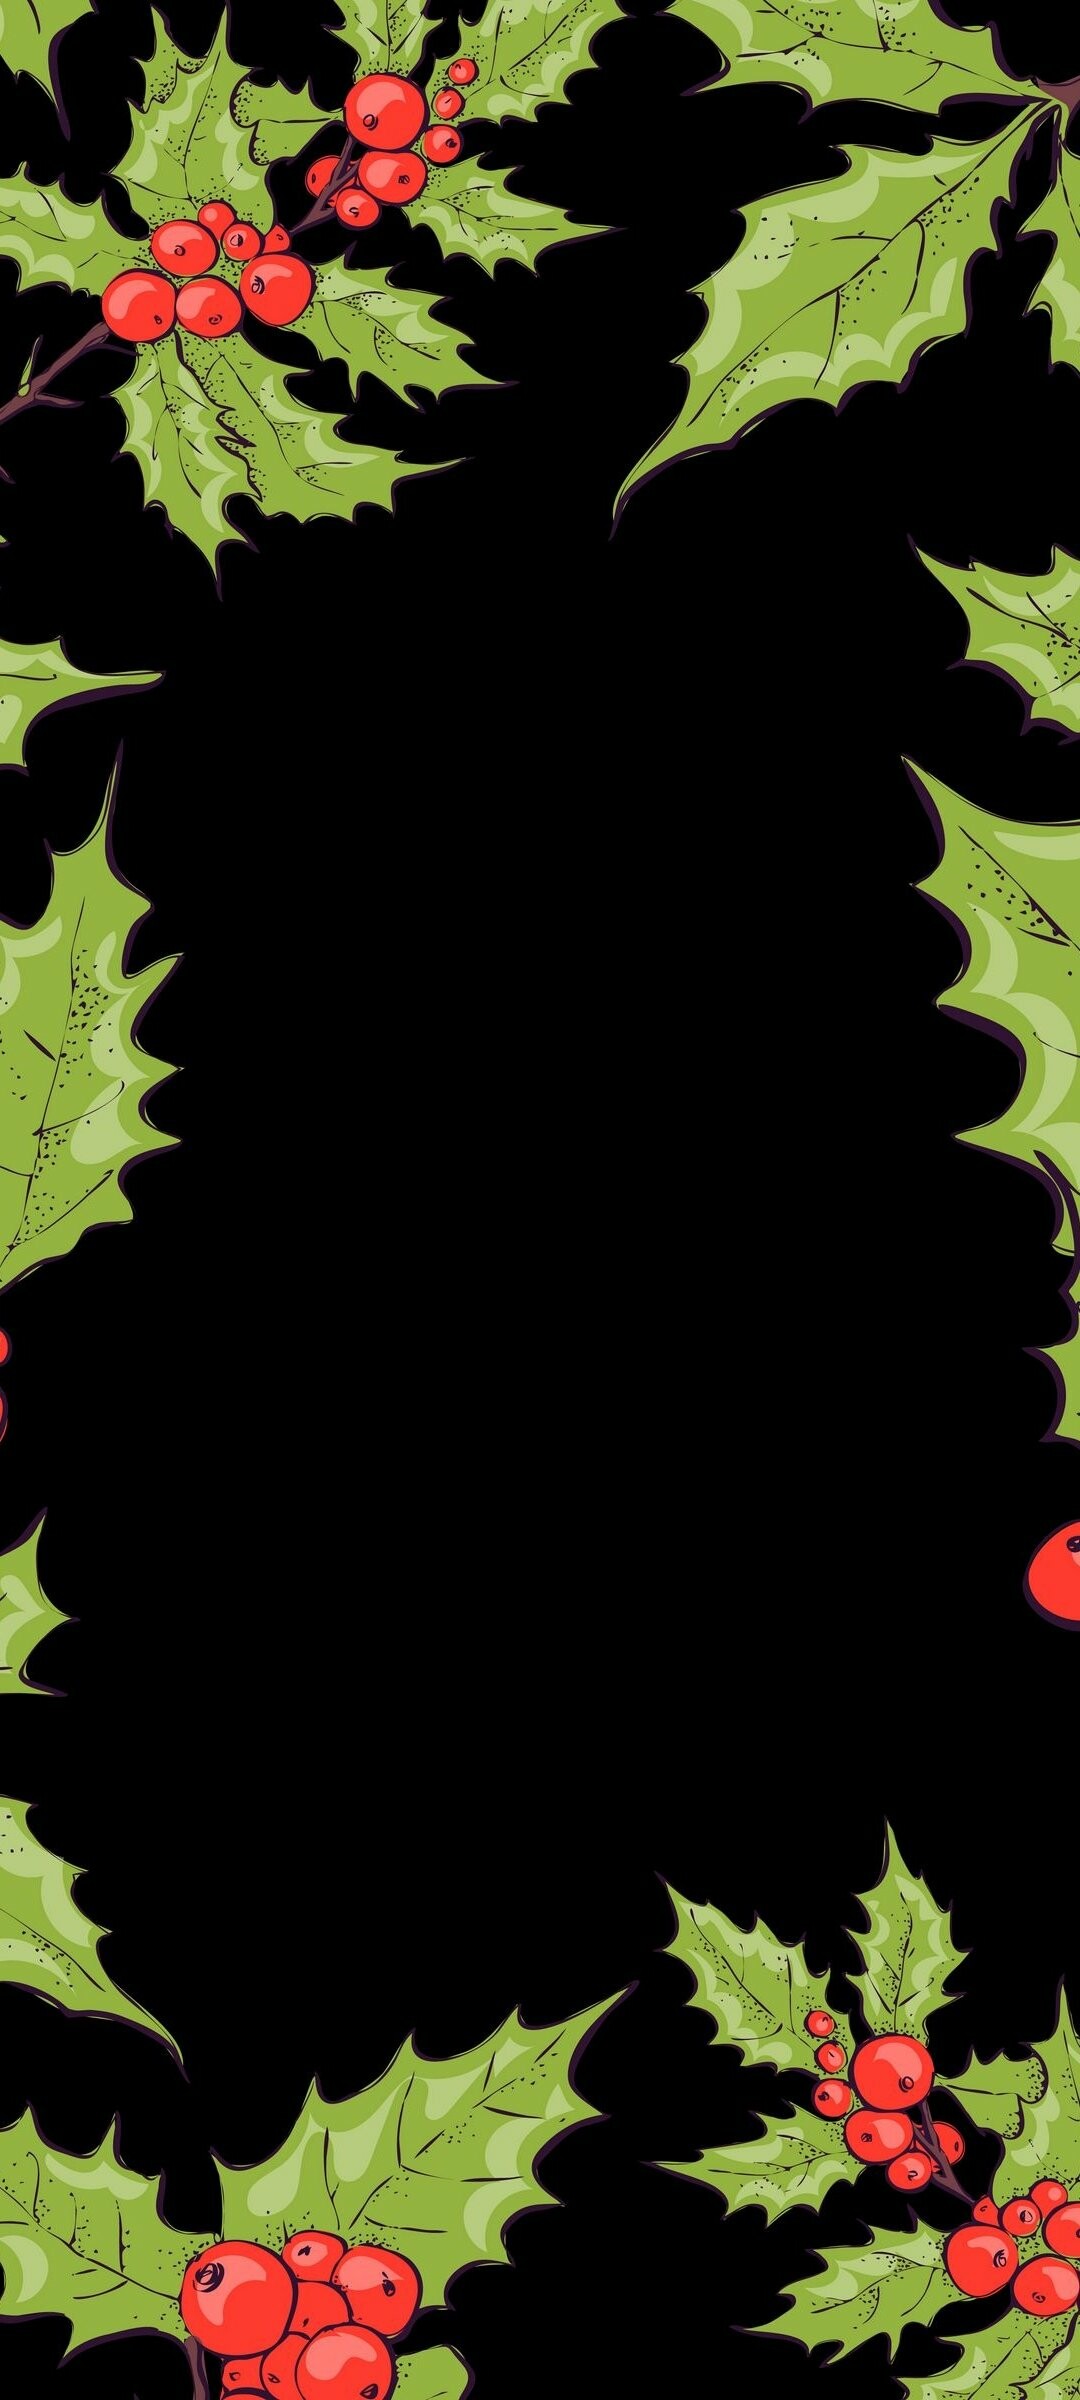 Mistletoe: The flower of the UK county of Herefordshire. 1080x2400 HD Wallpaper.